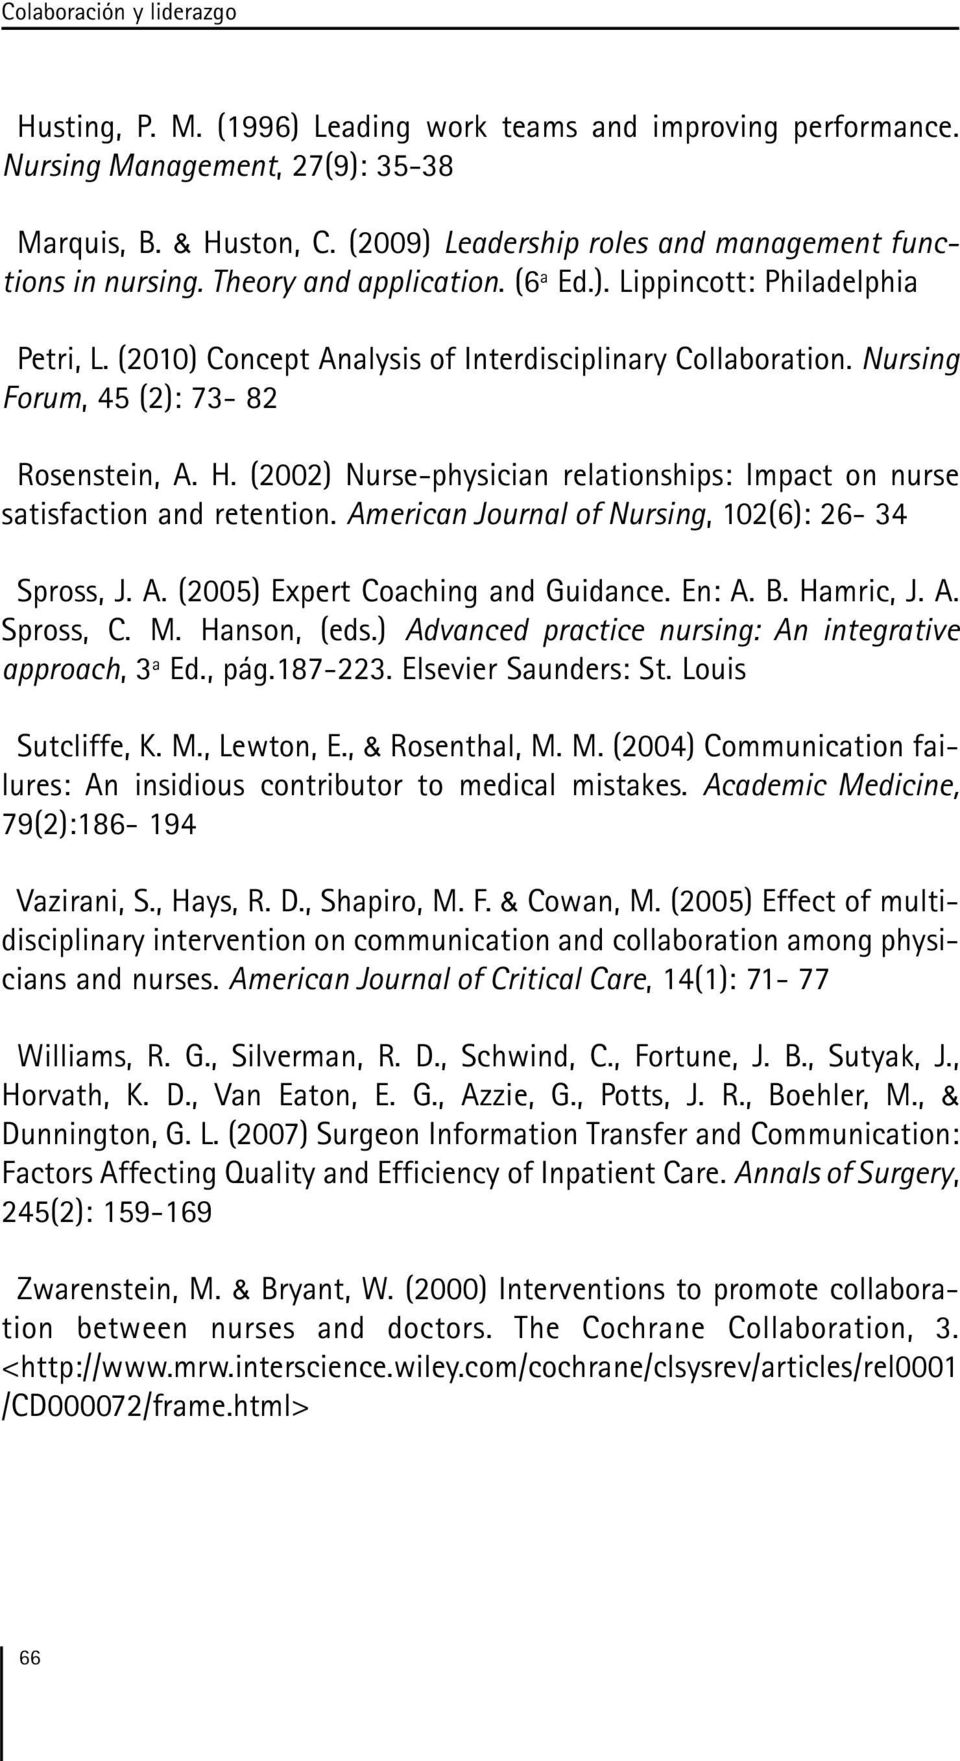 Nursing Forum, 45 (2): 73-82 Rosenstein, A. H. (2002) Nurse-physician relationships: Impact on nurse satisfaction and retention. American Journal of Nursing, 102(6): 26-34 Spross, J. A. (2005) Expert Coaching and Guidance.